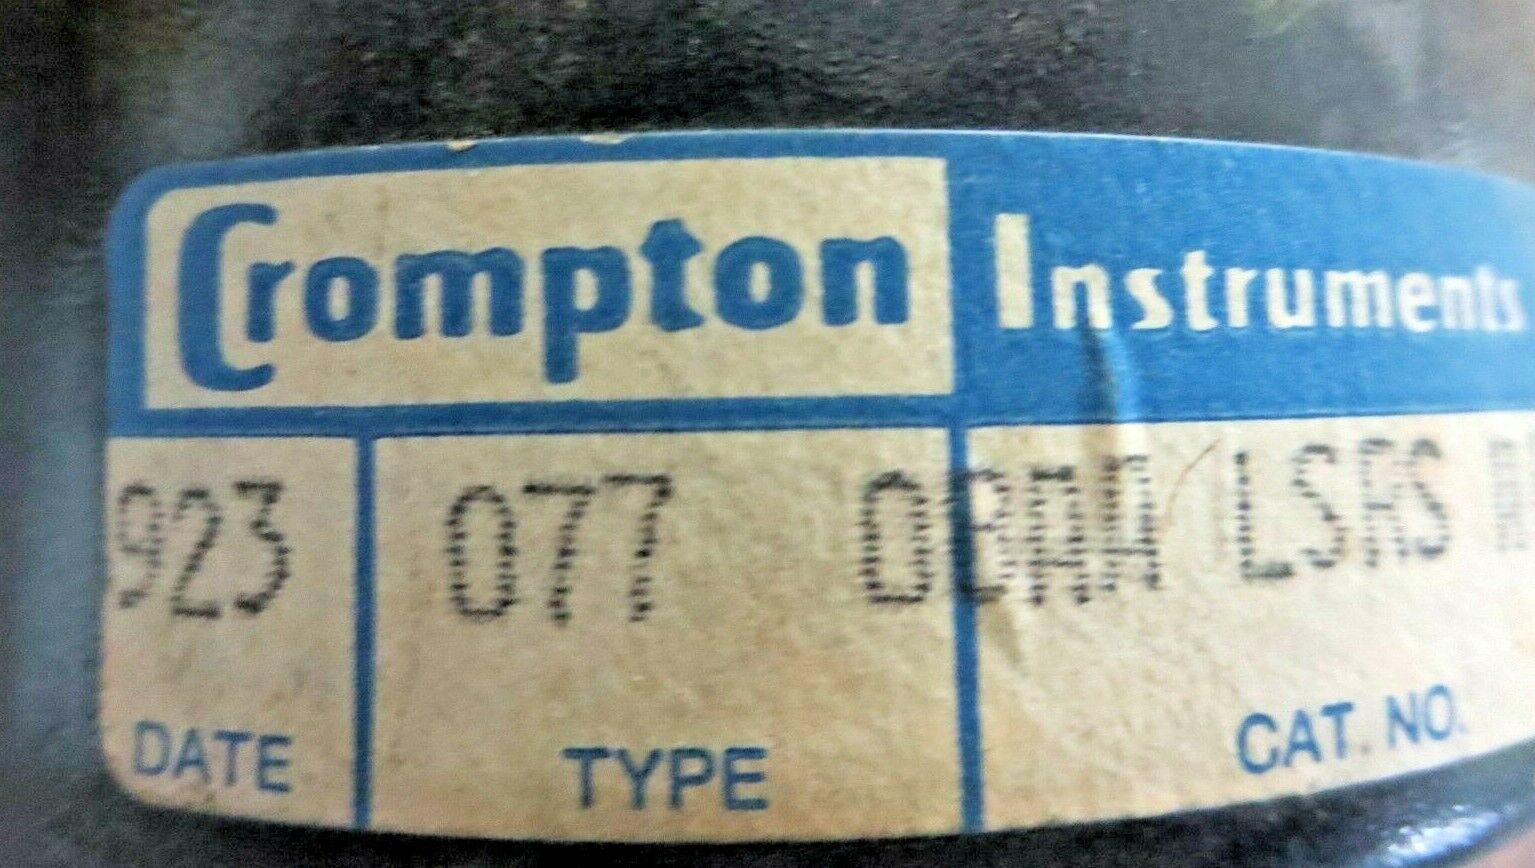 CROMPTON AMPERES / AMP GAGE / NEW OLD STOCK